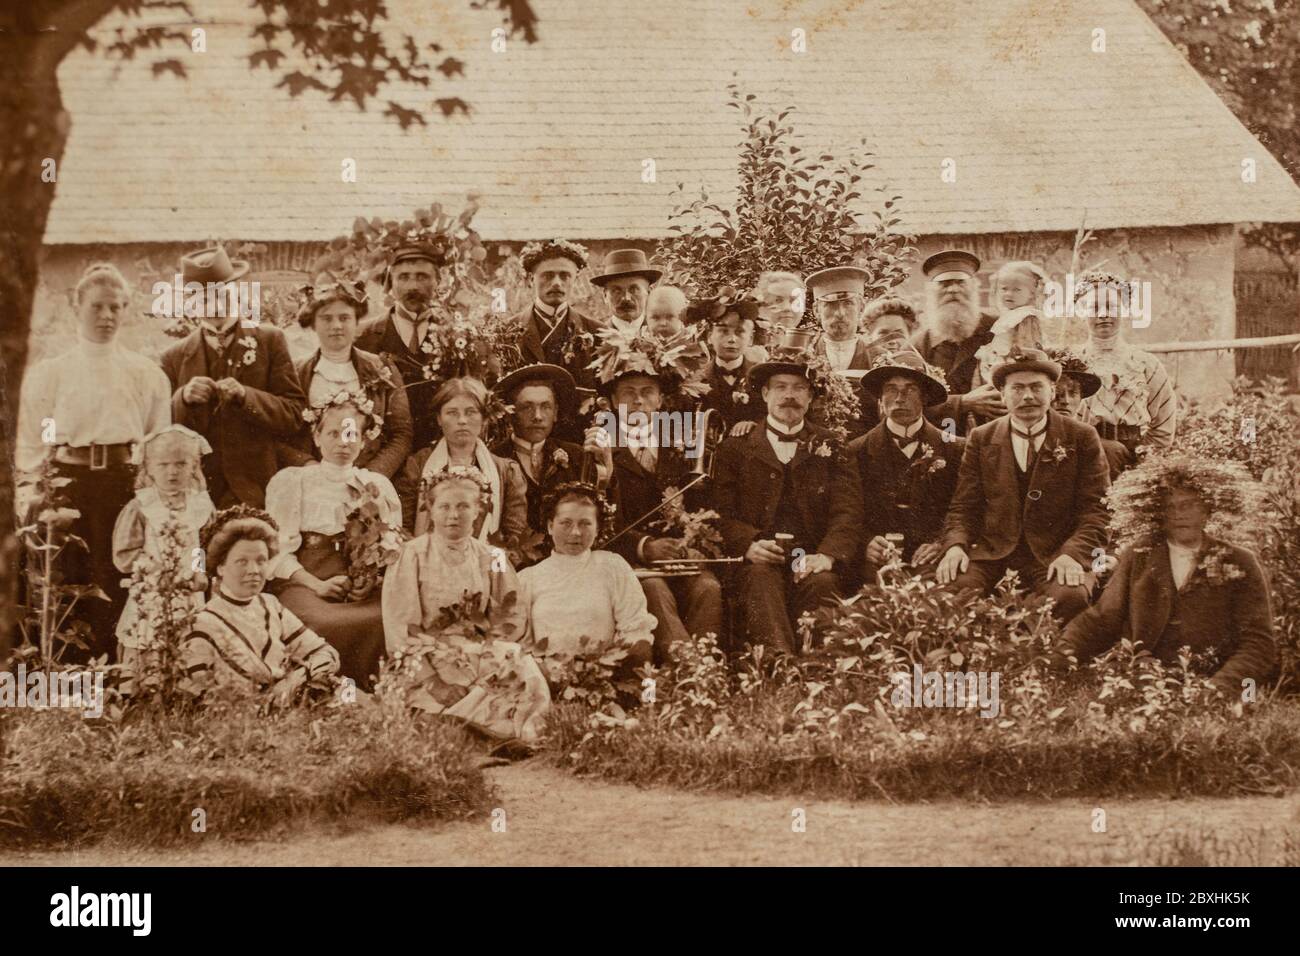 RUSSIA - CIRCA 1905 - 1910: Group photo of party guests. Vintage ...